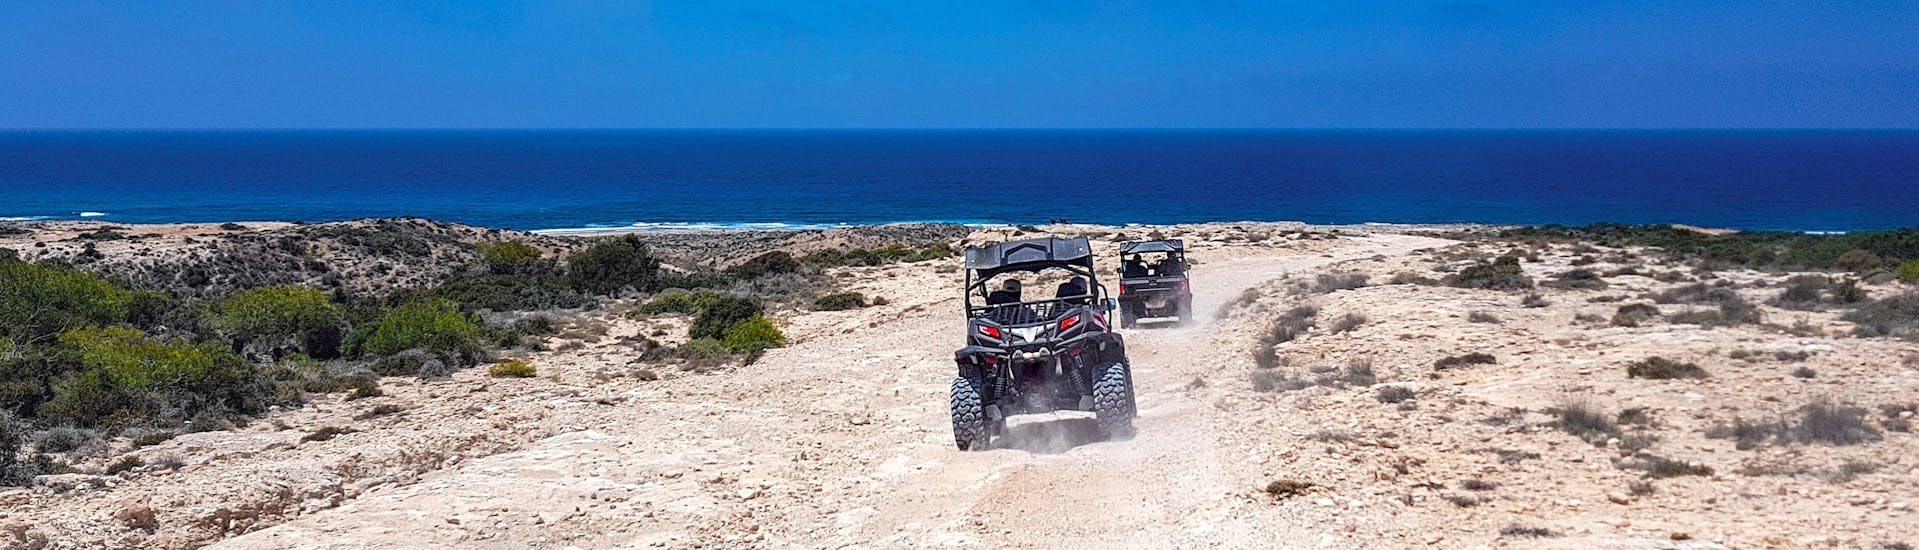 Two buggies heading to the coast during an activity for quad, ATV and buggy.